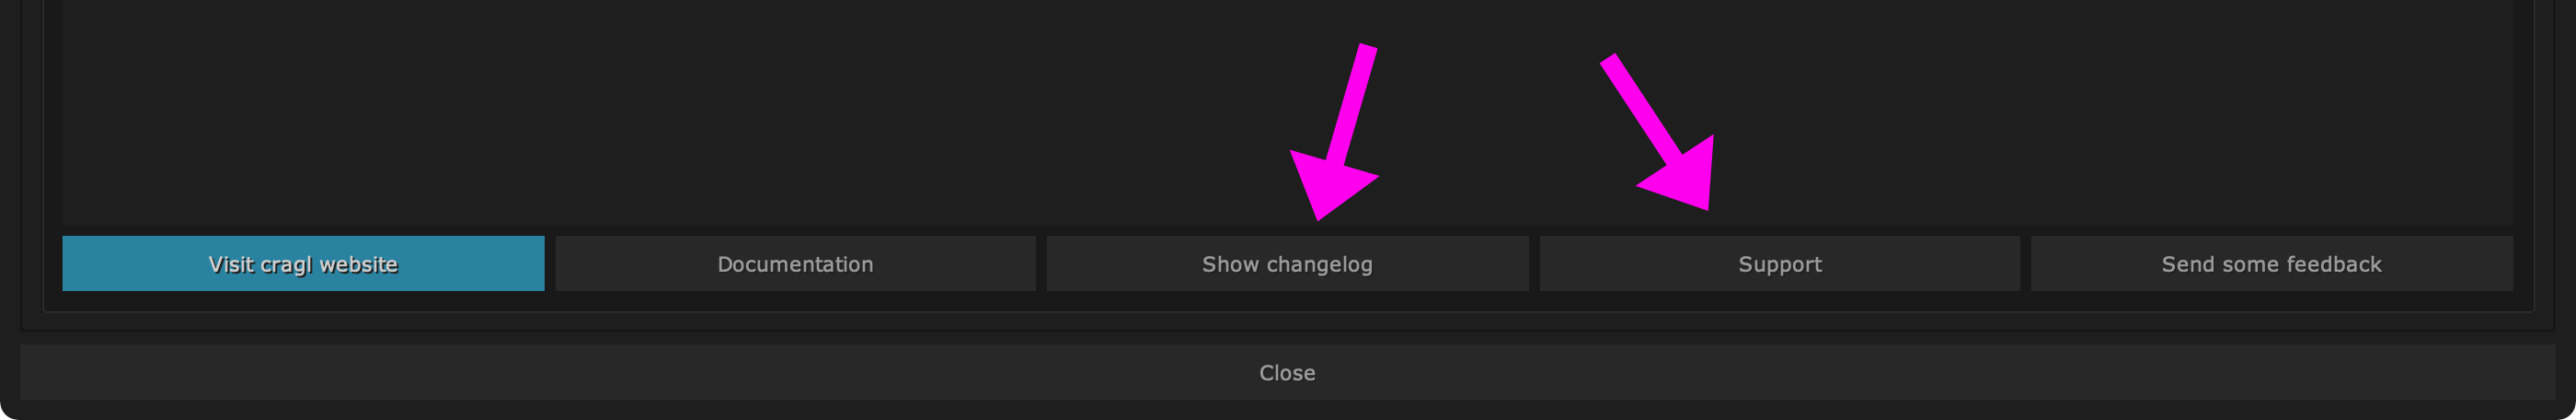 _images/changelog_support_buttons.png